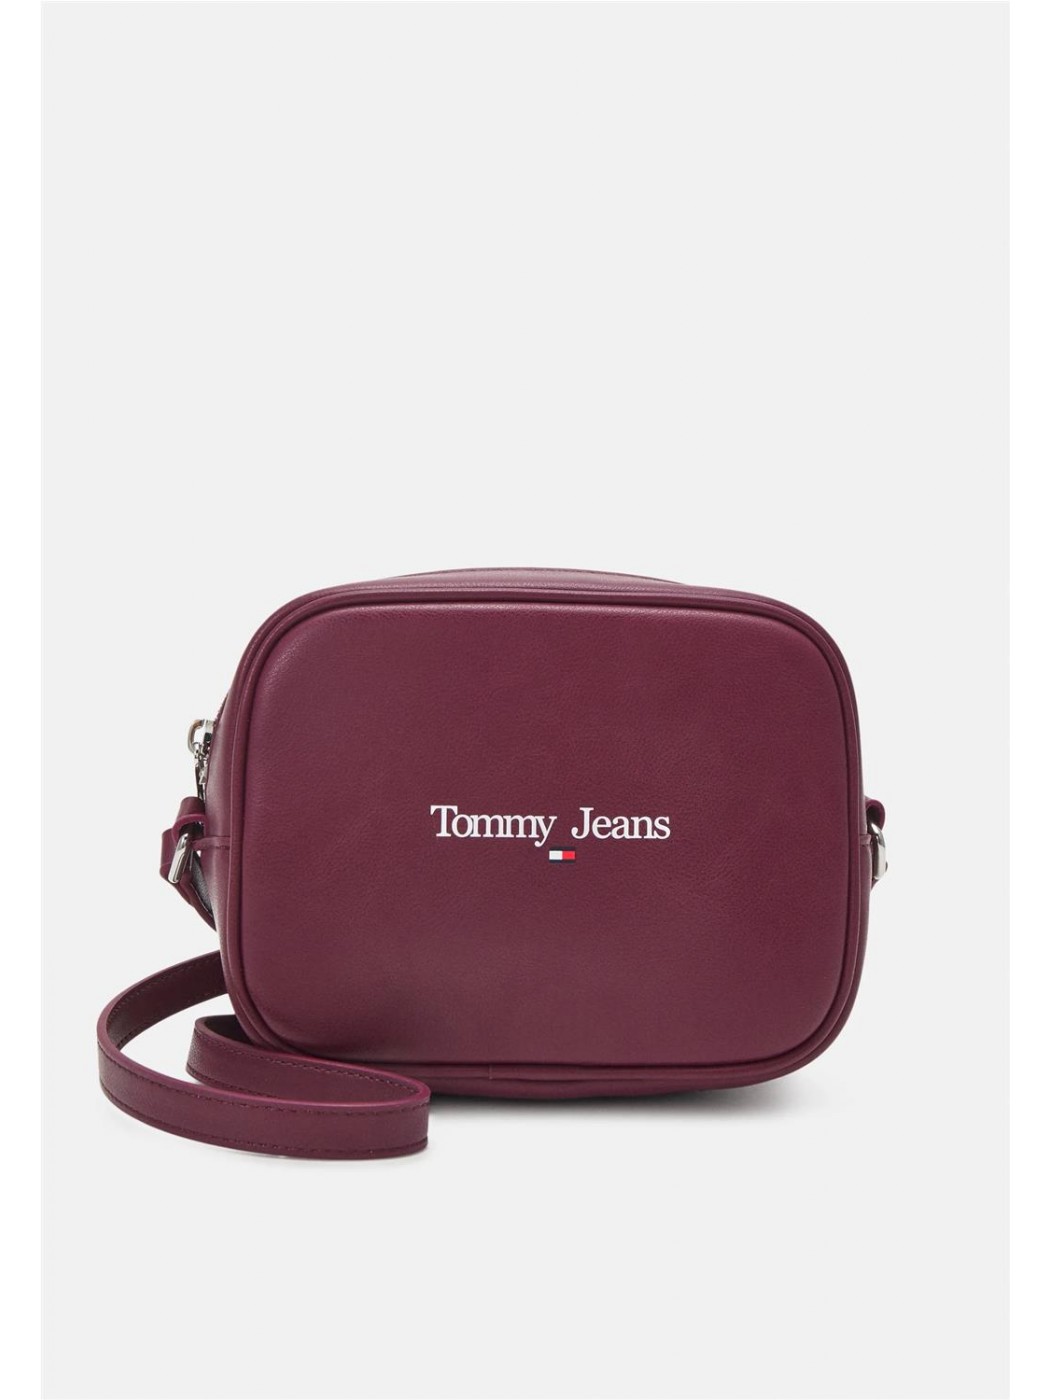 BOLSO TOMMY JEANS MUJER TJW...